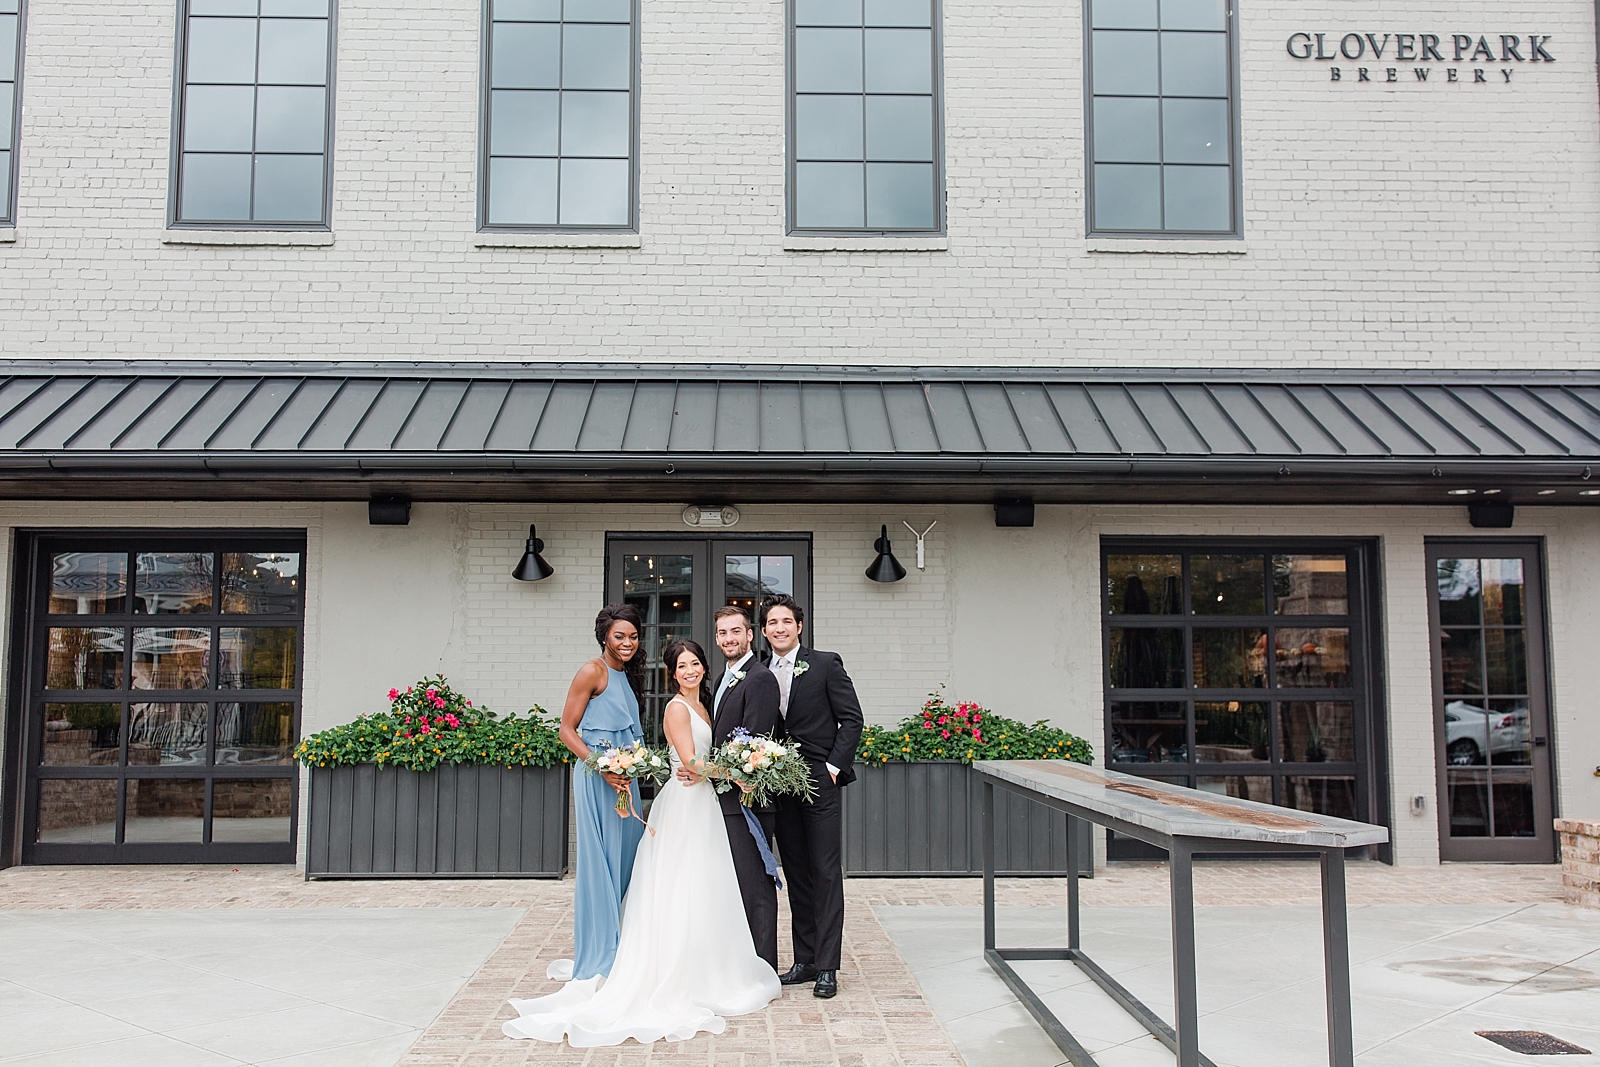 Glover Park Brewery Wedding Bridal Party on Back patio of Venue Photo